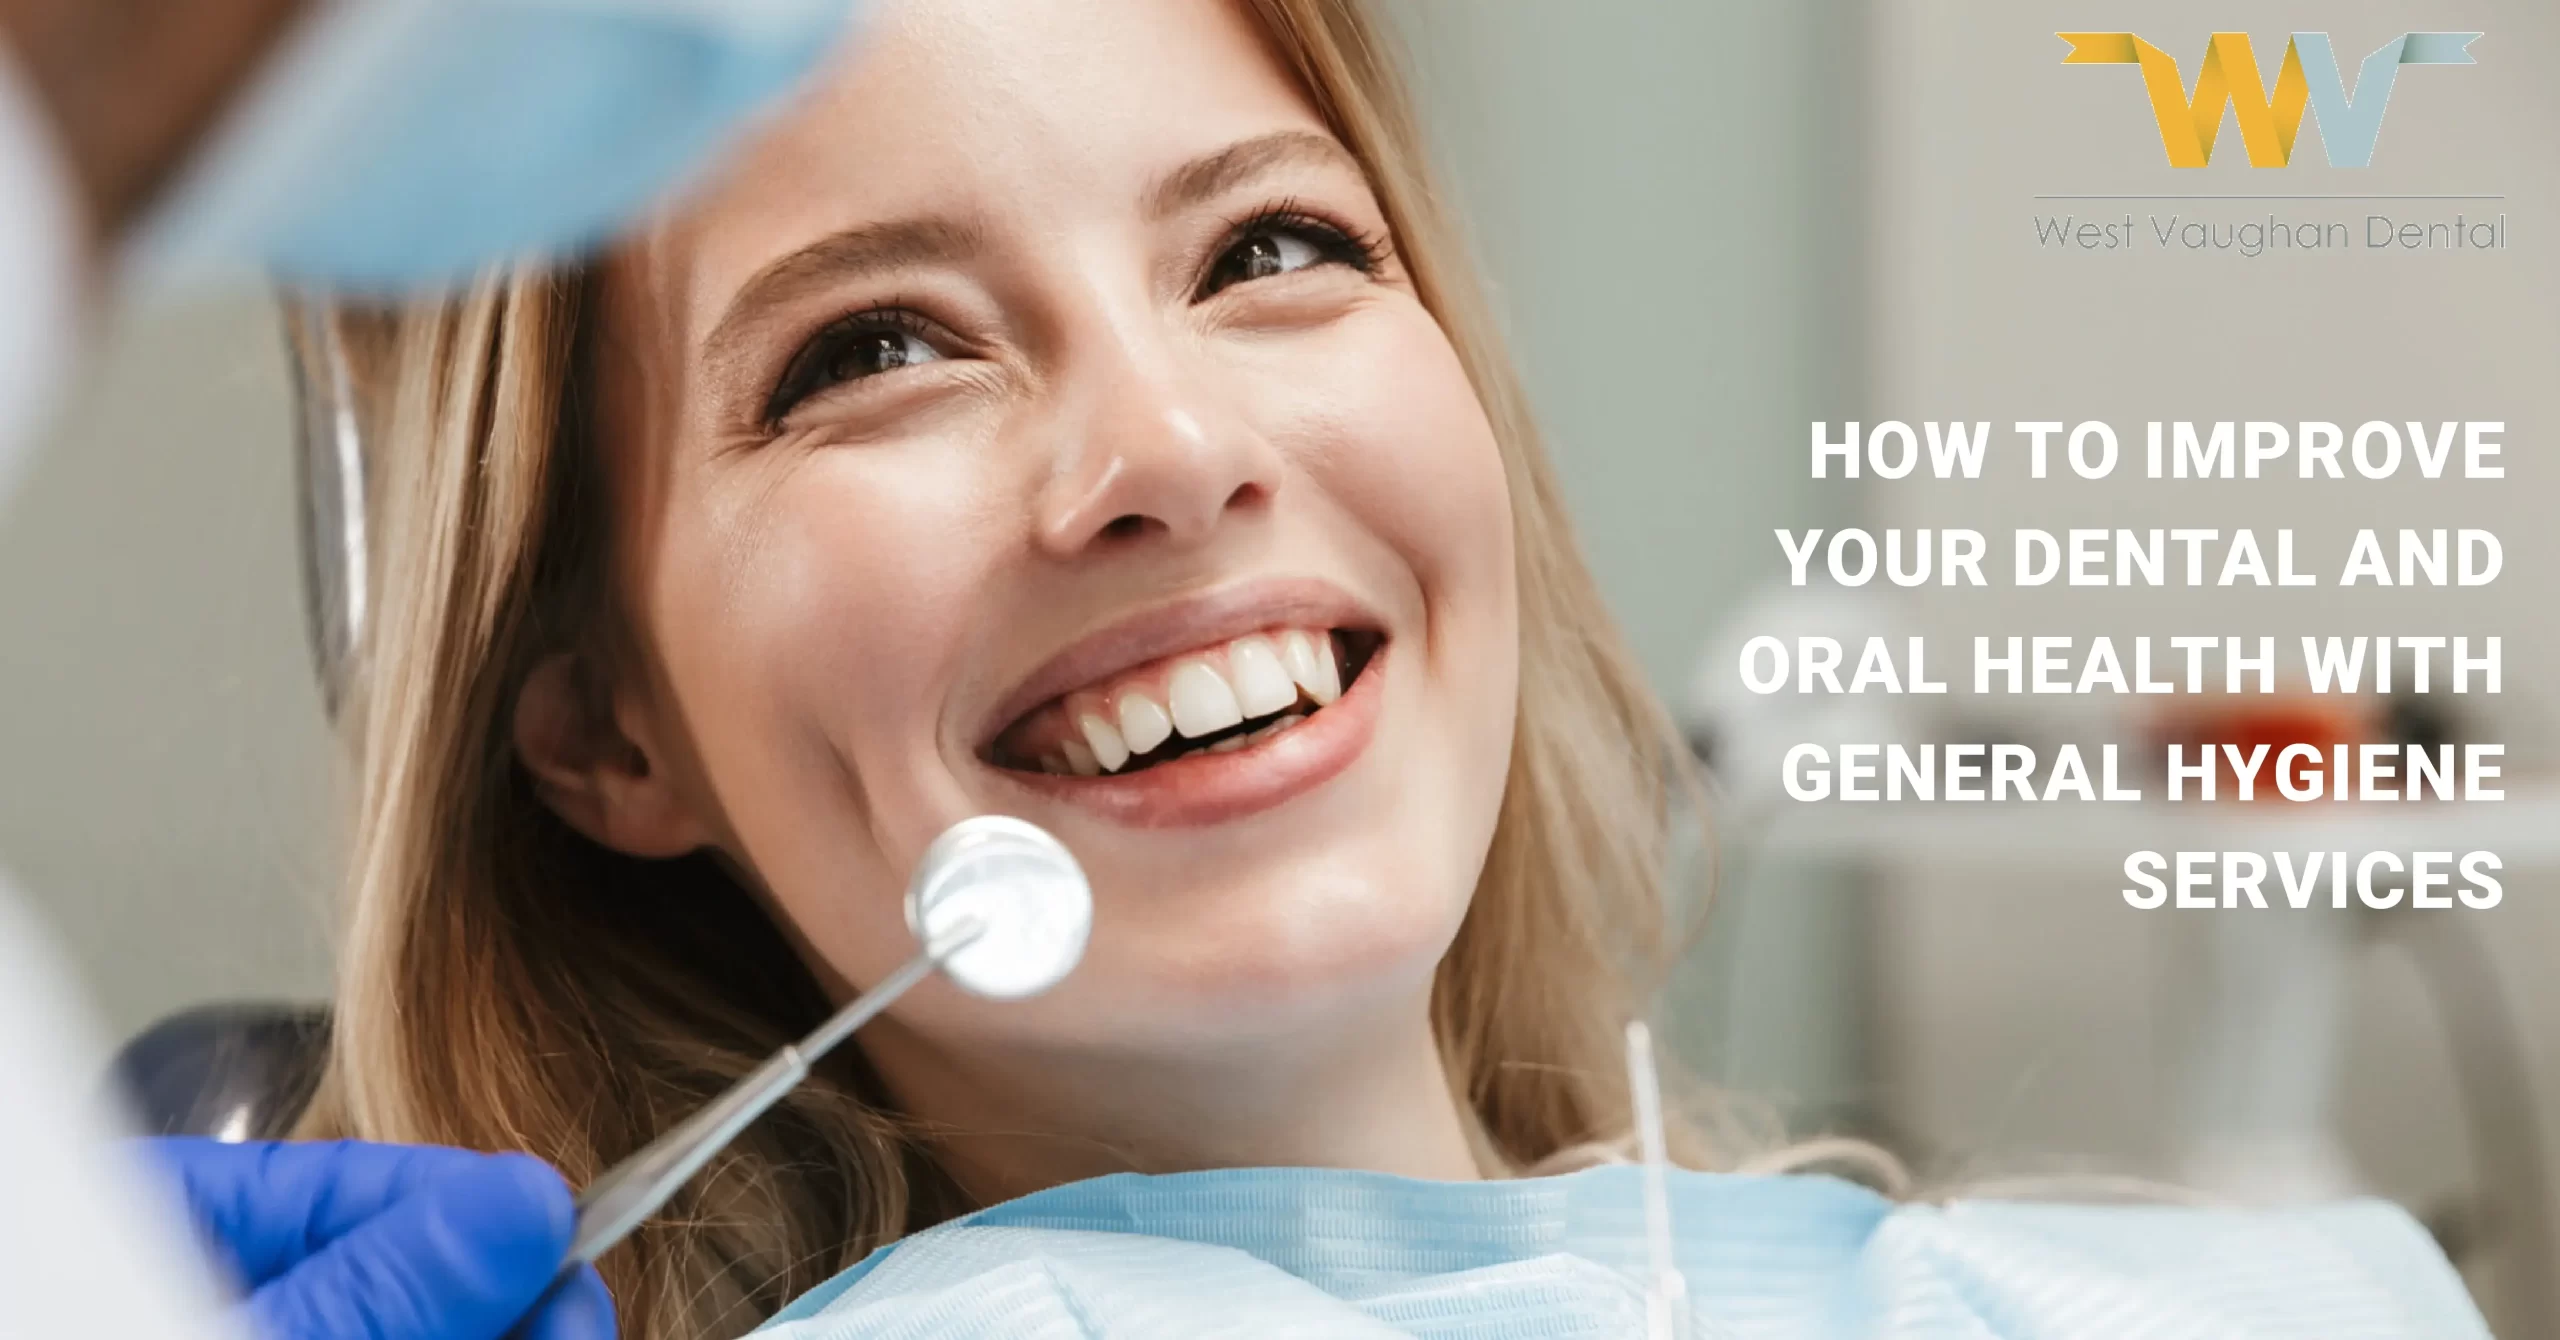 How to Improve your Dental and Oral Health with General Hygiene Services.